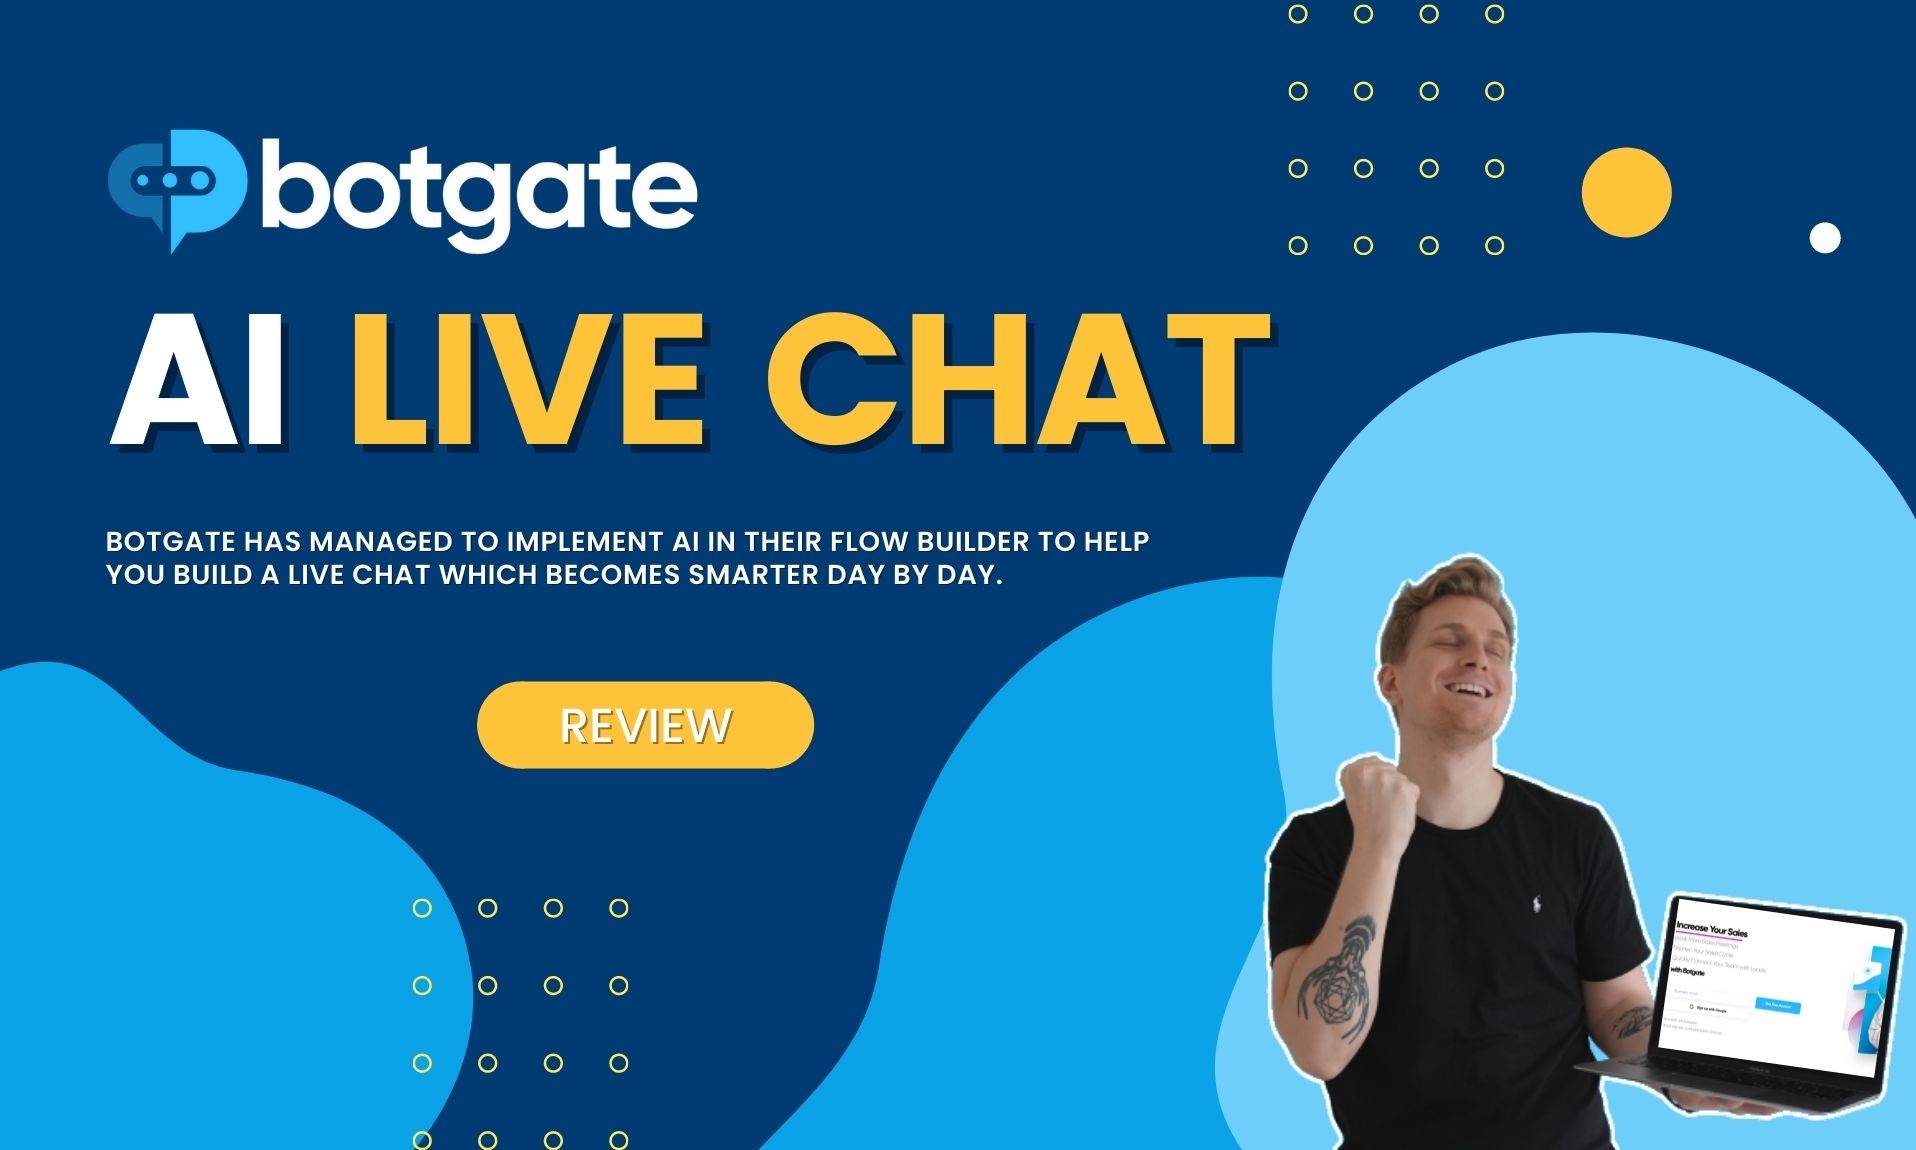 Botgate review - A personalised experience with an AI chat bot